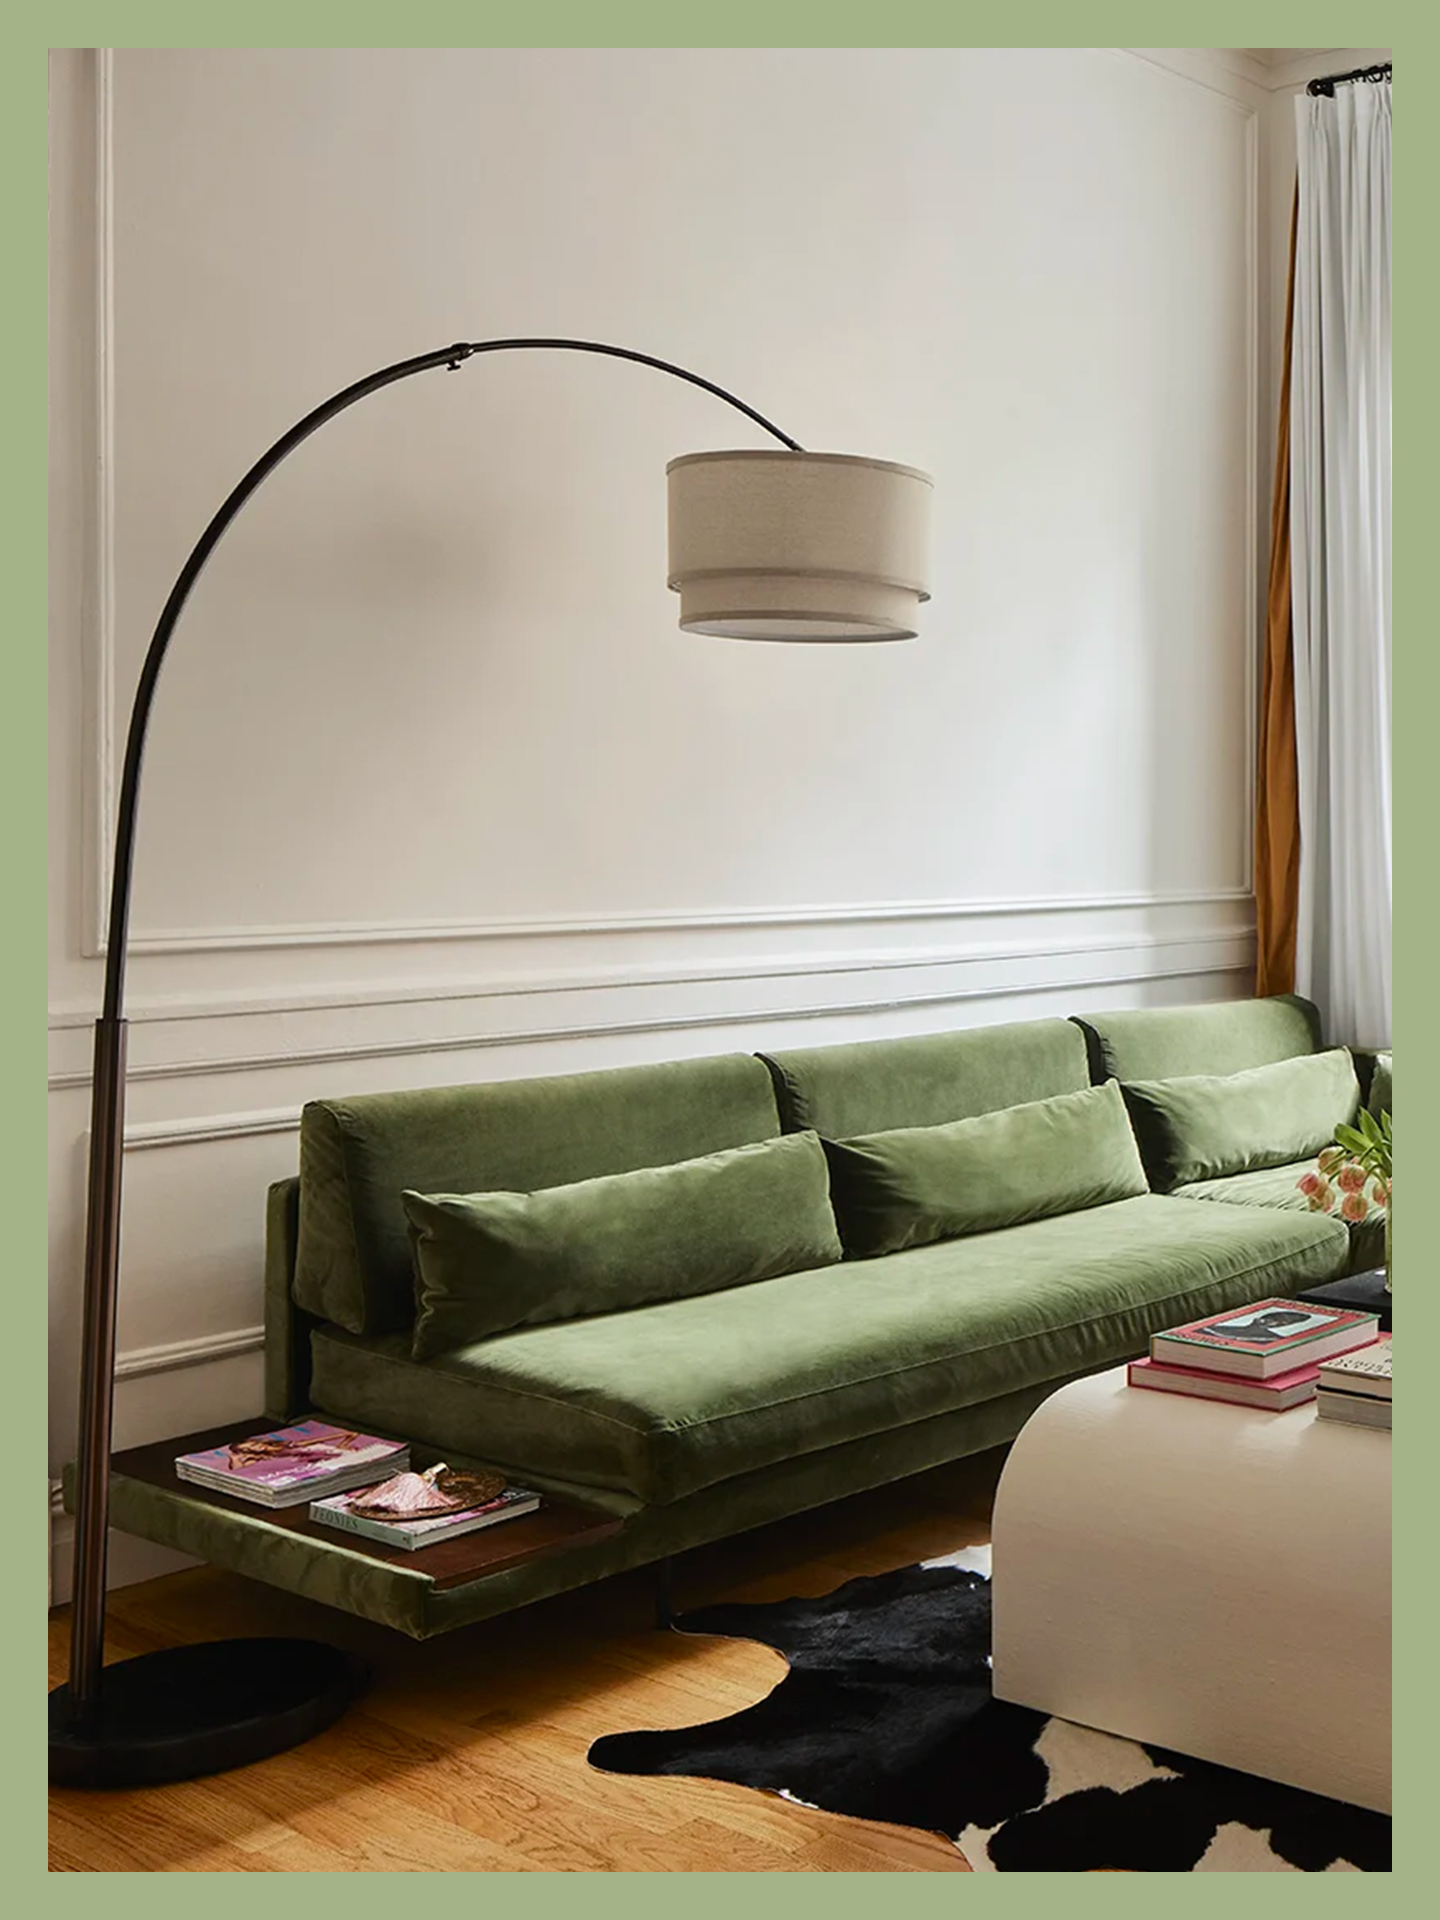 green velvet couch in living room with arched bronze lamp curved overhead in Brynn Whitfield's living room